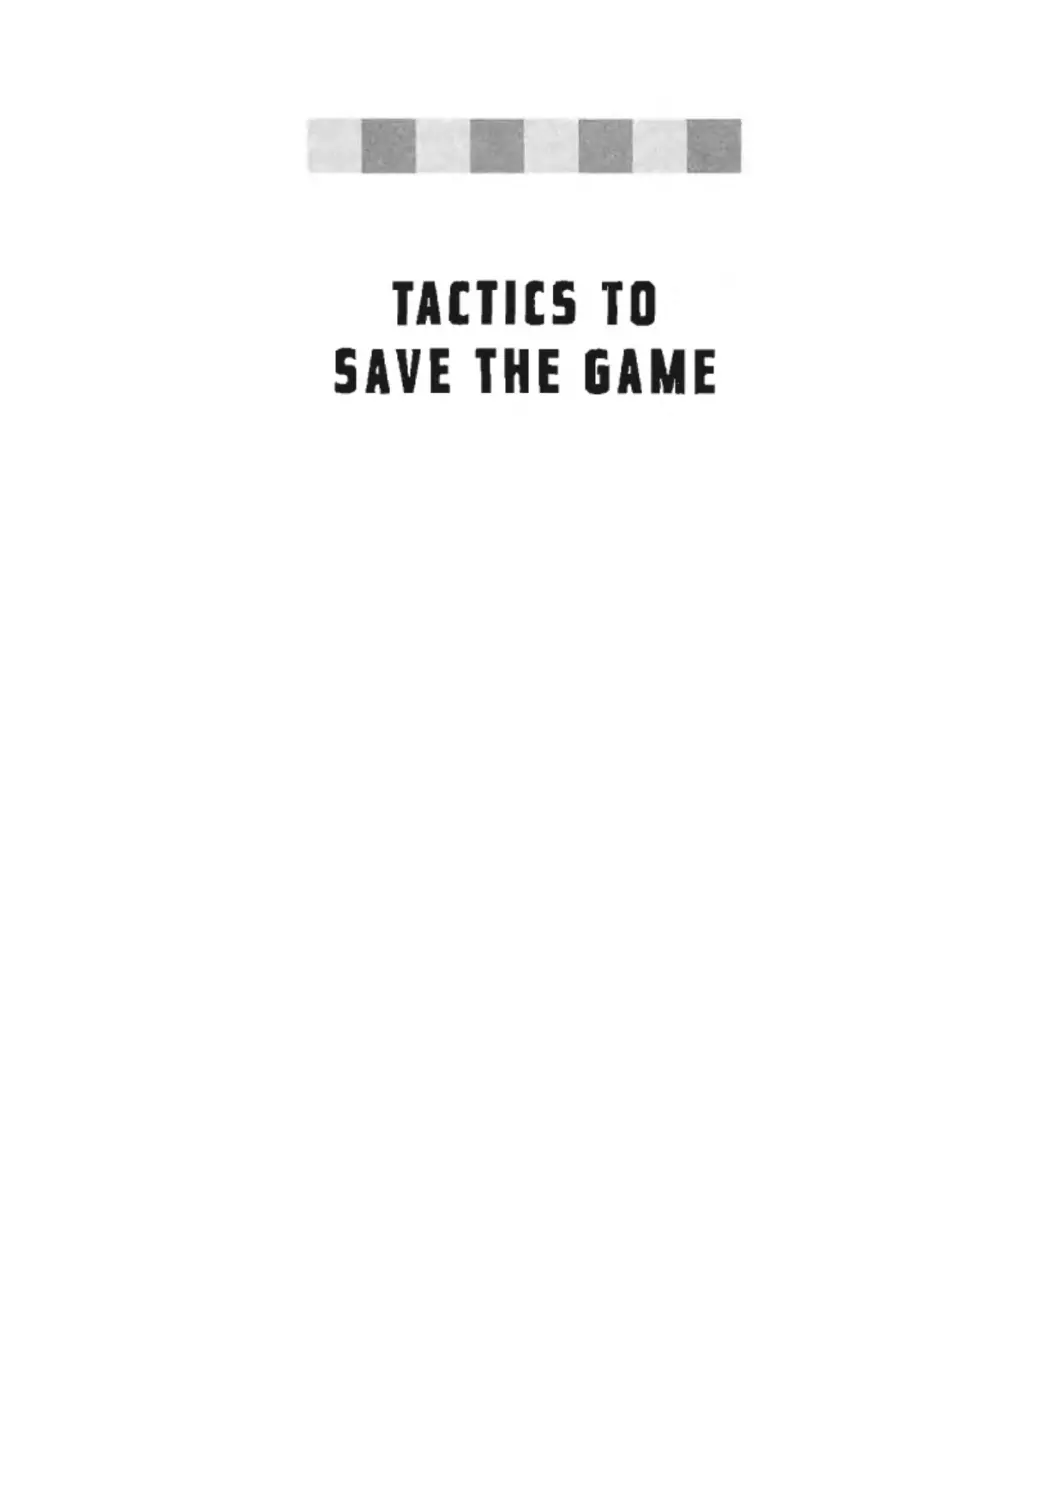 Tactics to save the game